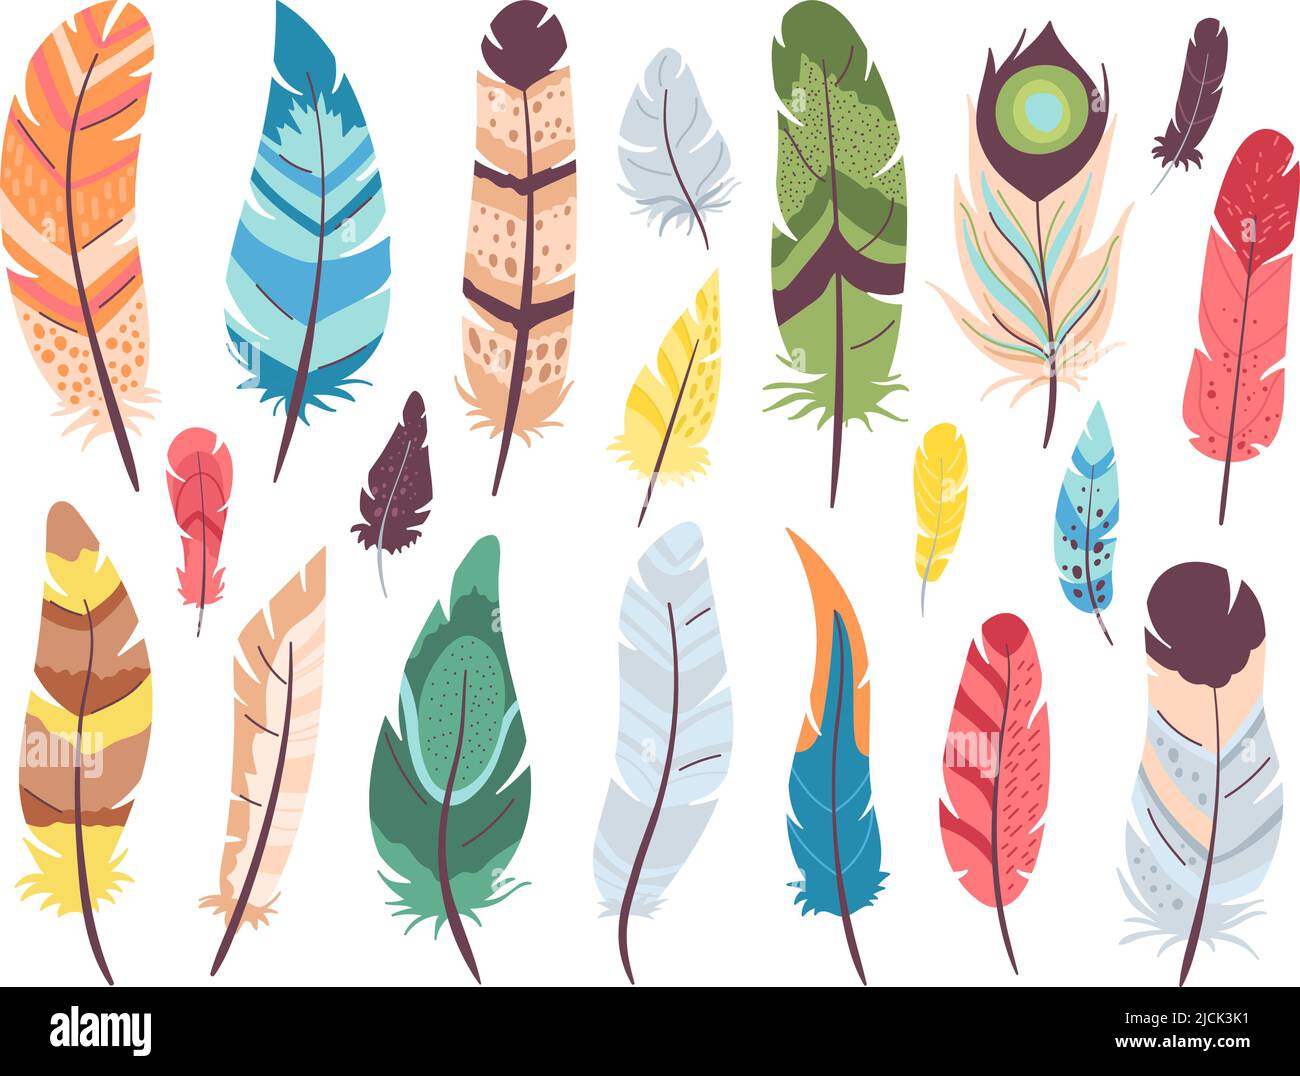 Flat color feathers. Bird feather, tribal indigenous indian decorative elements. Elegant multicolor accessory kit, plumage with geometry ornament Stock Vector